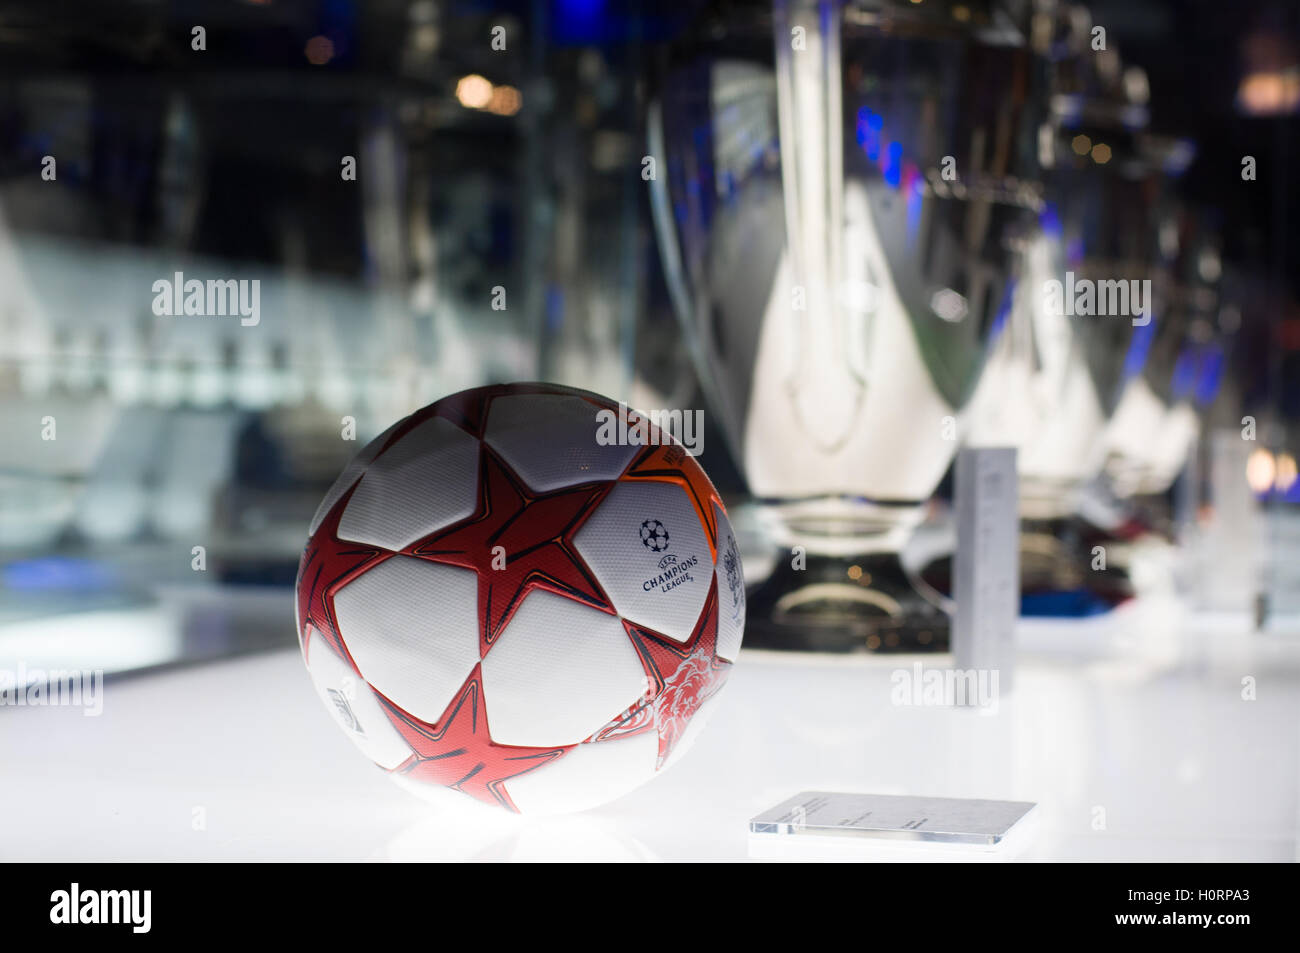 BARCELONA - SEPTEMBER 22, 2014: UEFA Champions League Ball in museum. UEFA Cup - trophy awarded annually by UEFA. Stock Photo